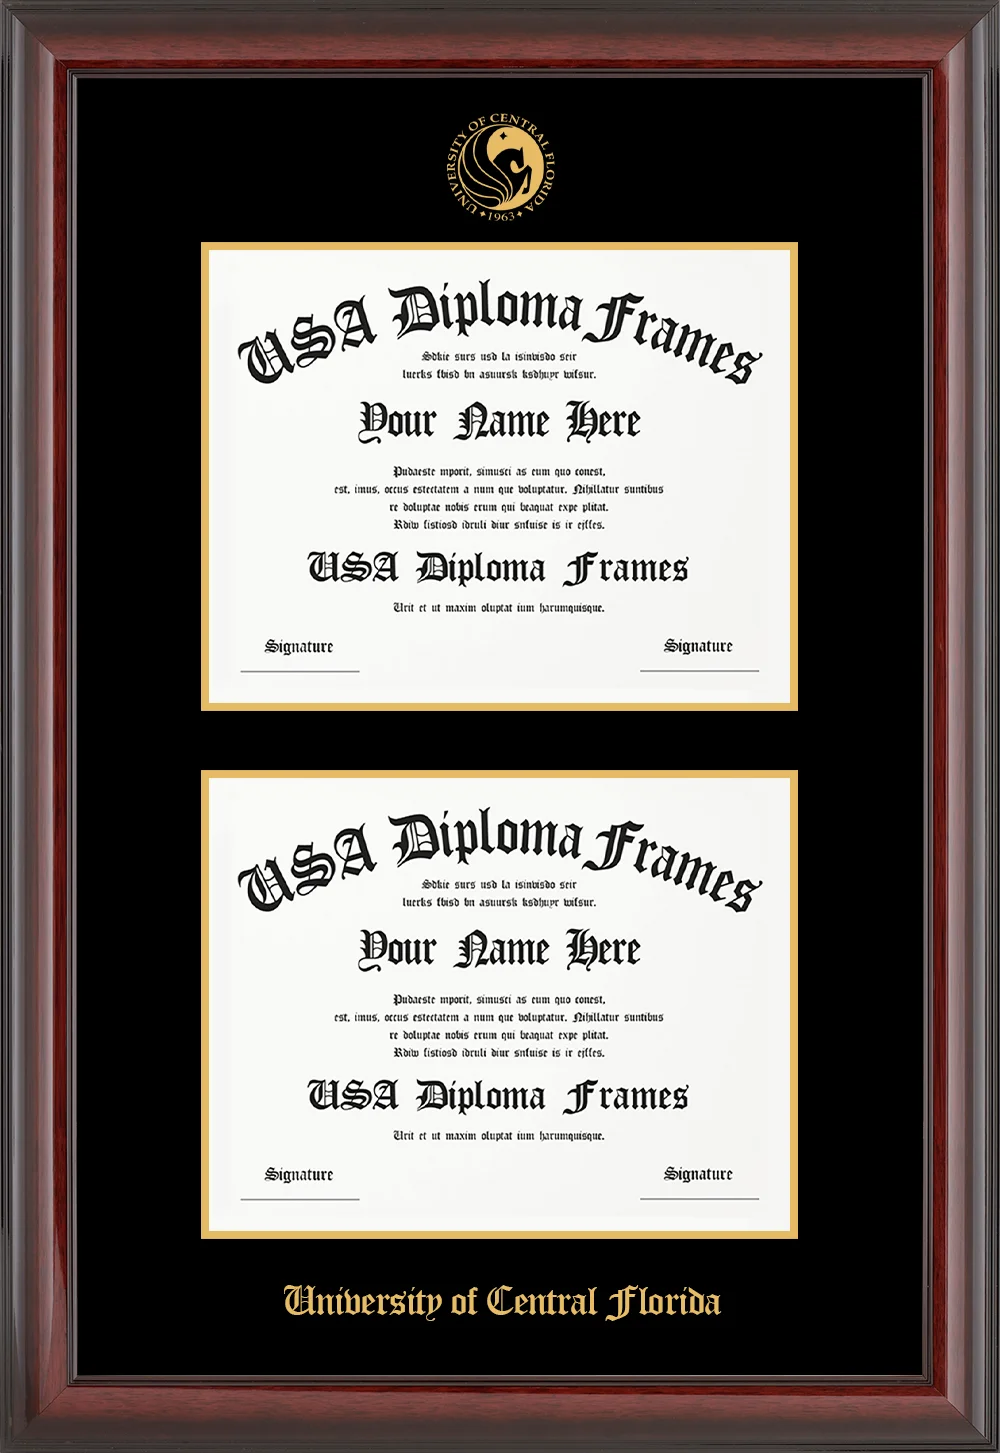 Double Documnet - Cherry Mahogany Glossy Moulding - Black Mat - Gold Accent Mat - University of Central Florida Embossing Diploma Frame